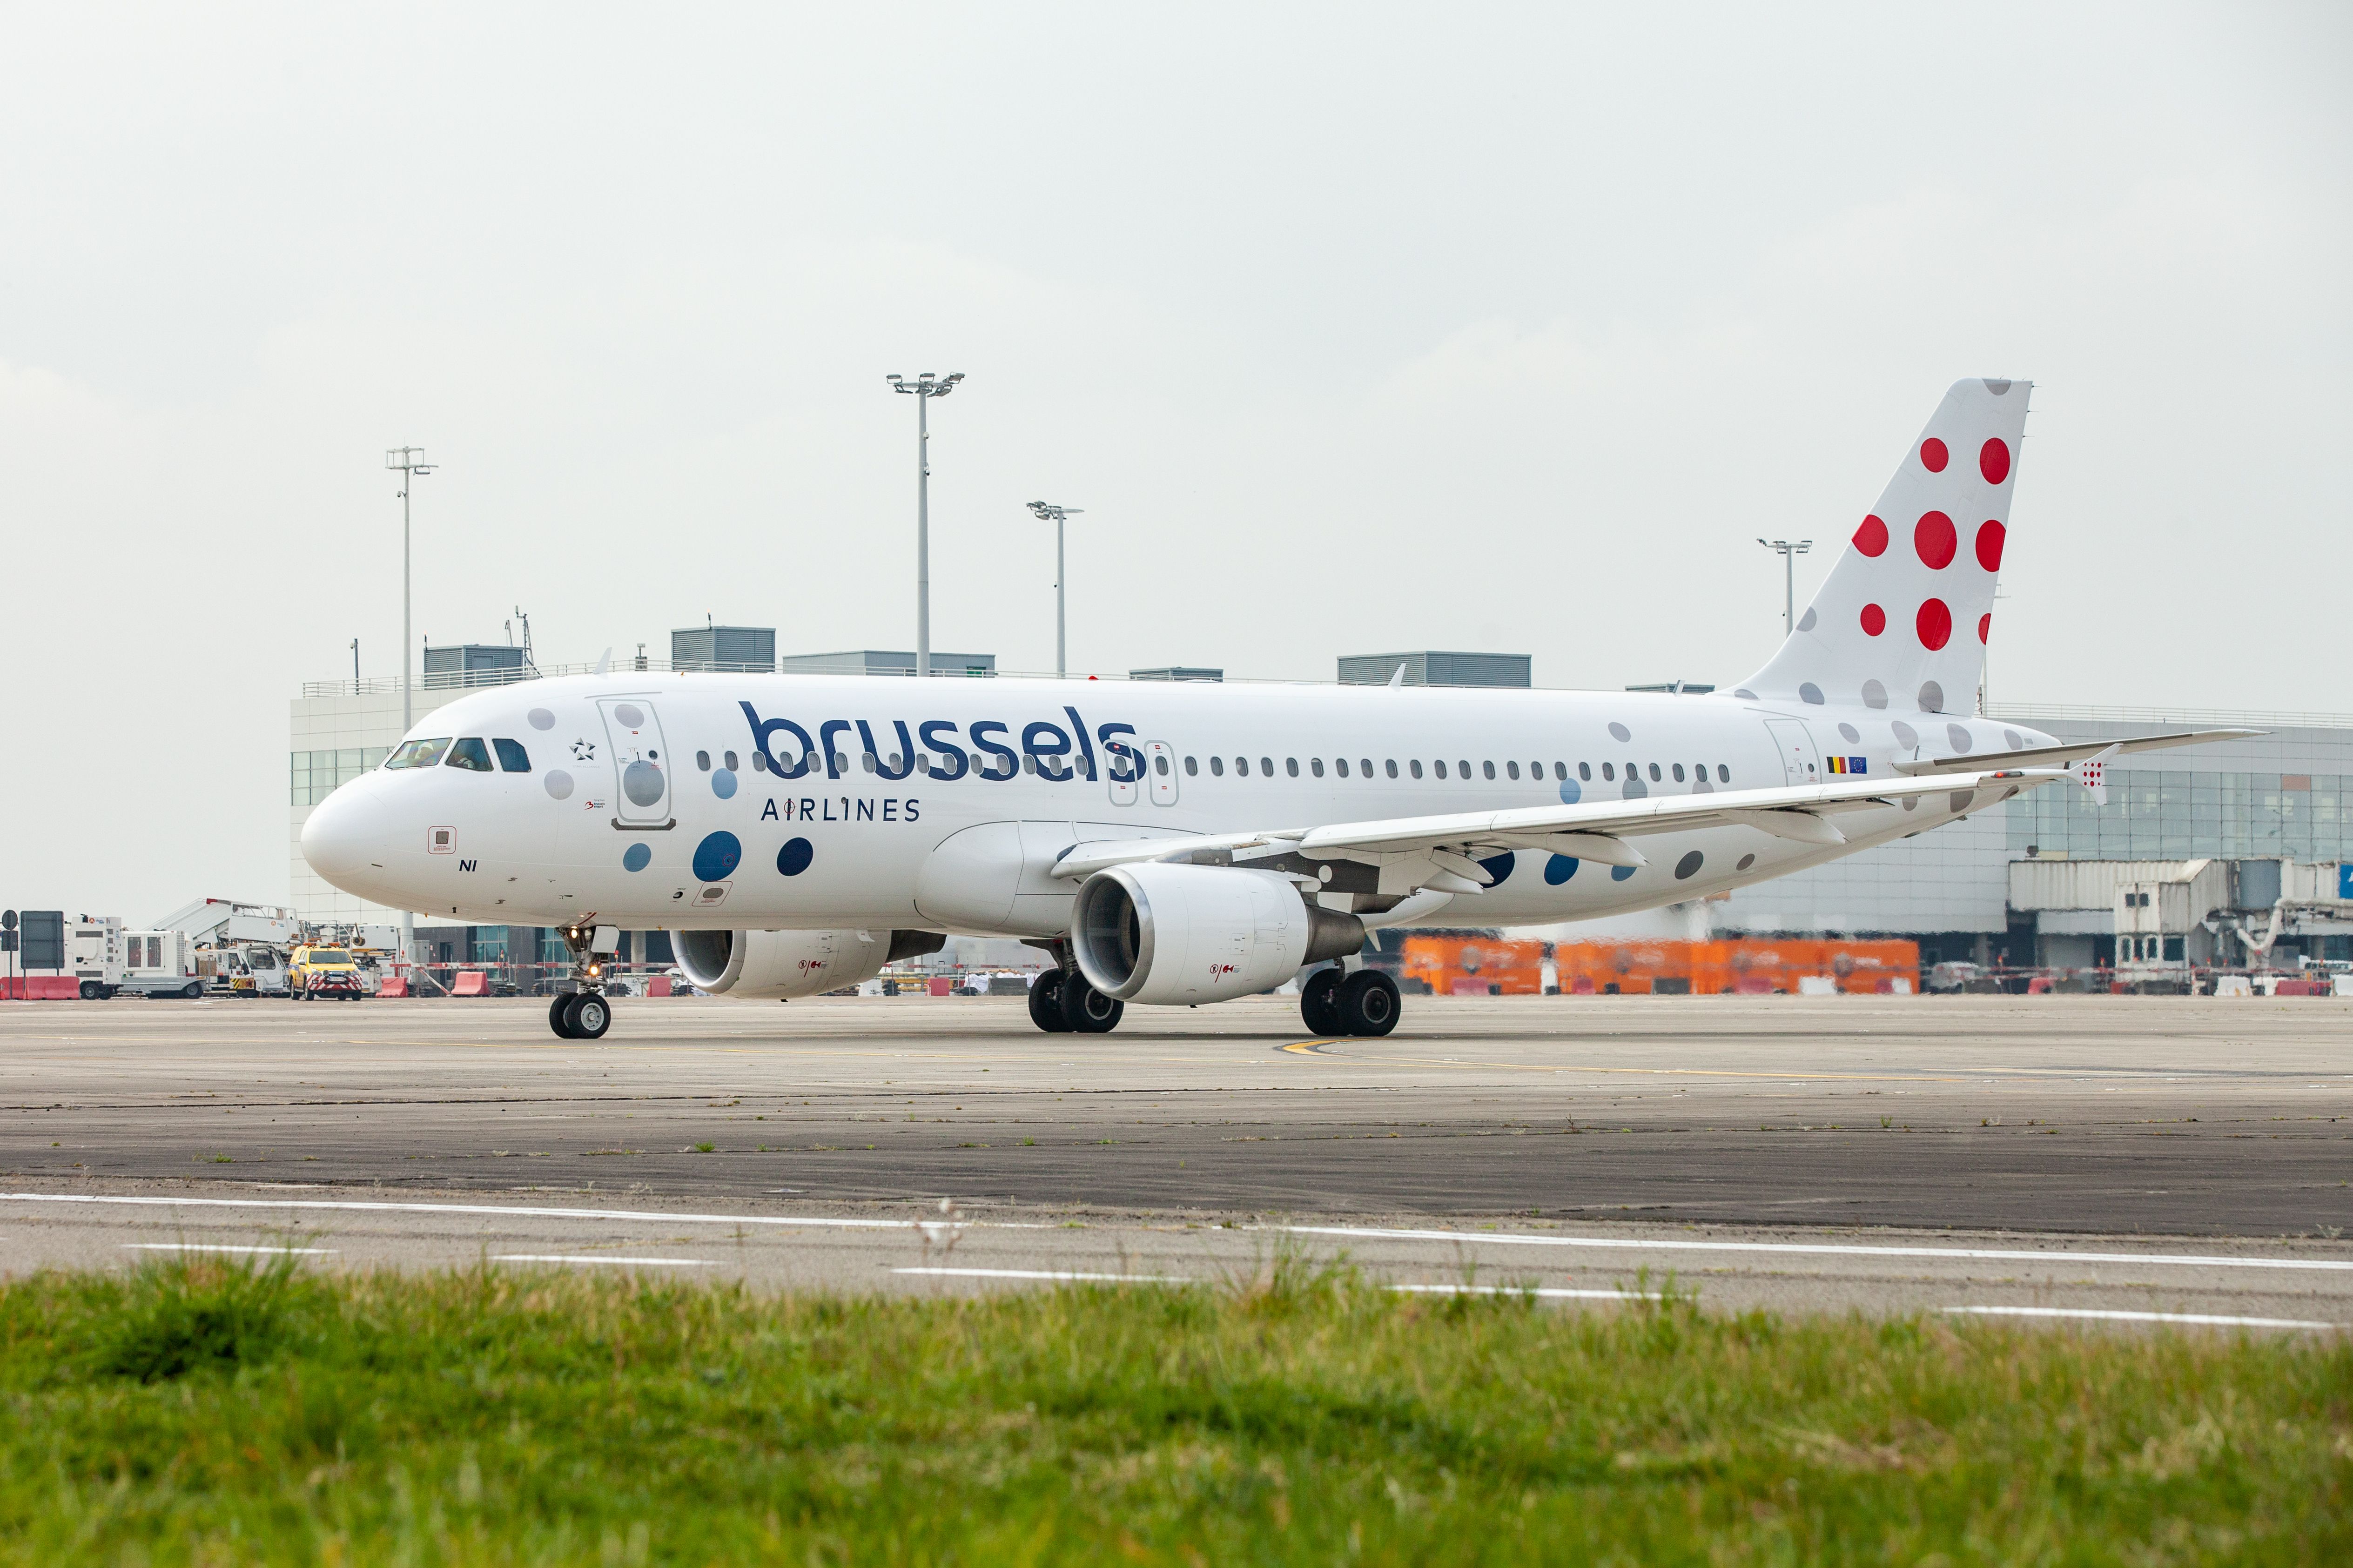 Brussels Airlines aicraft on apron at airport 